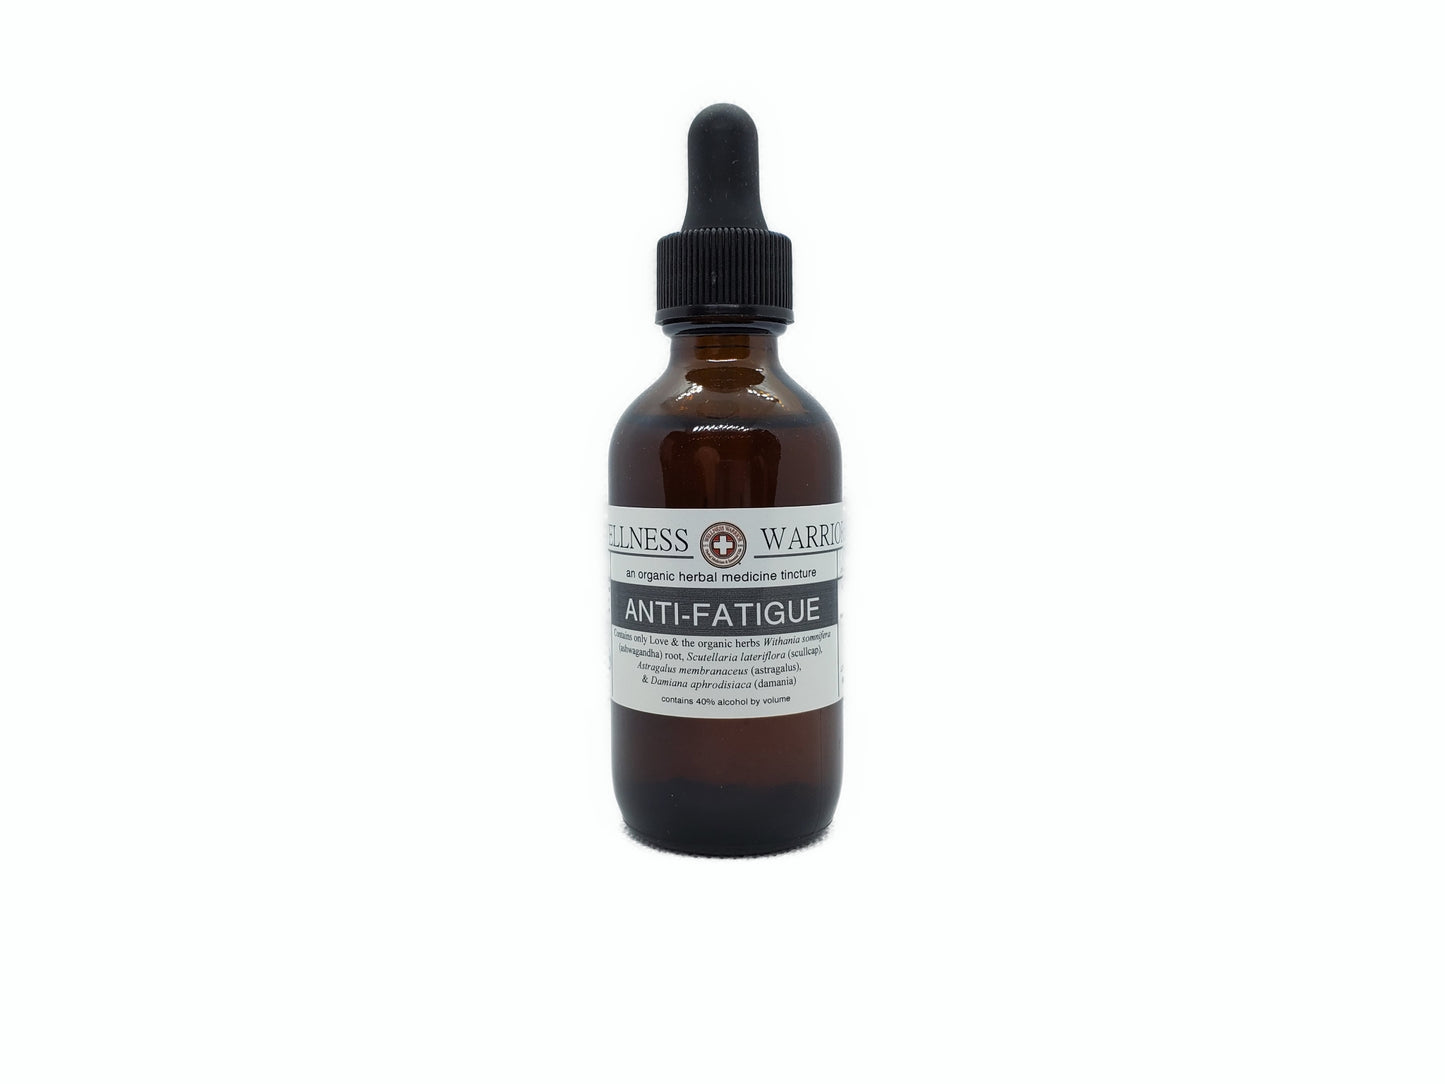 Antifatigue Herbal Tincture - First Aid for Fatigue